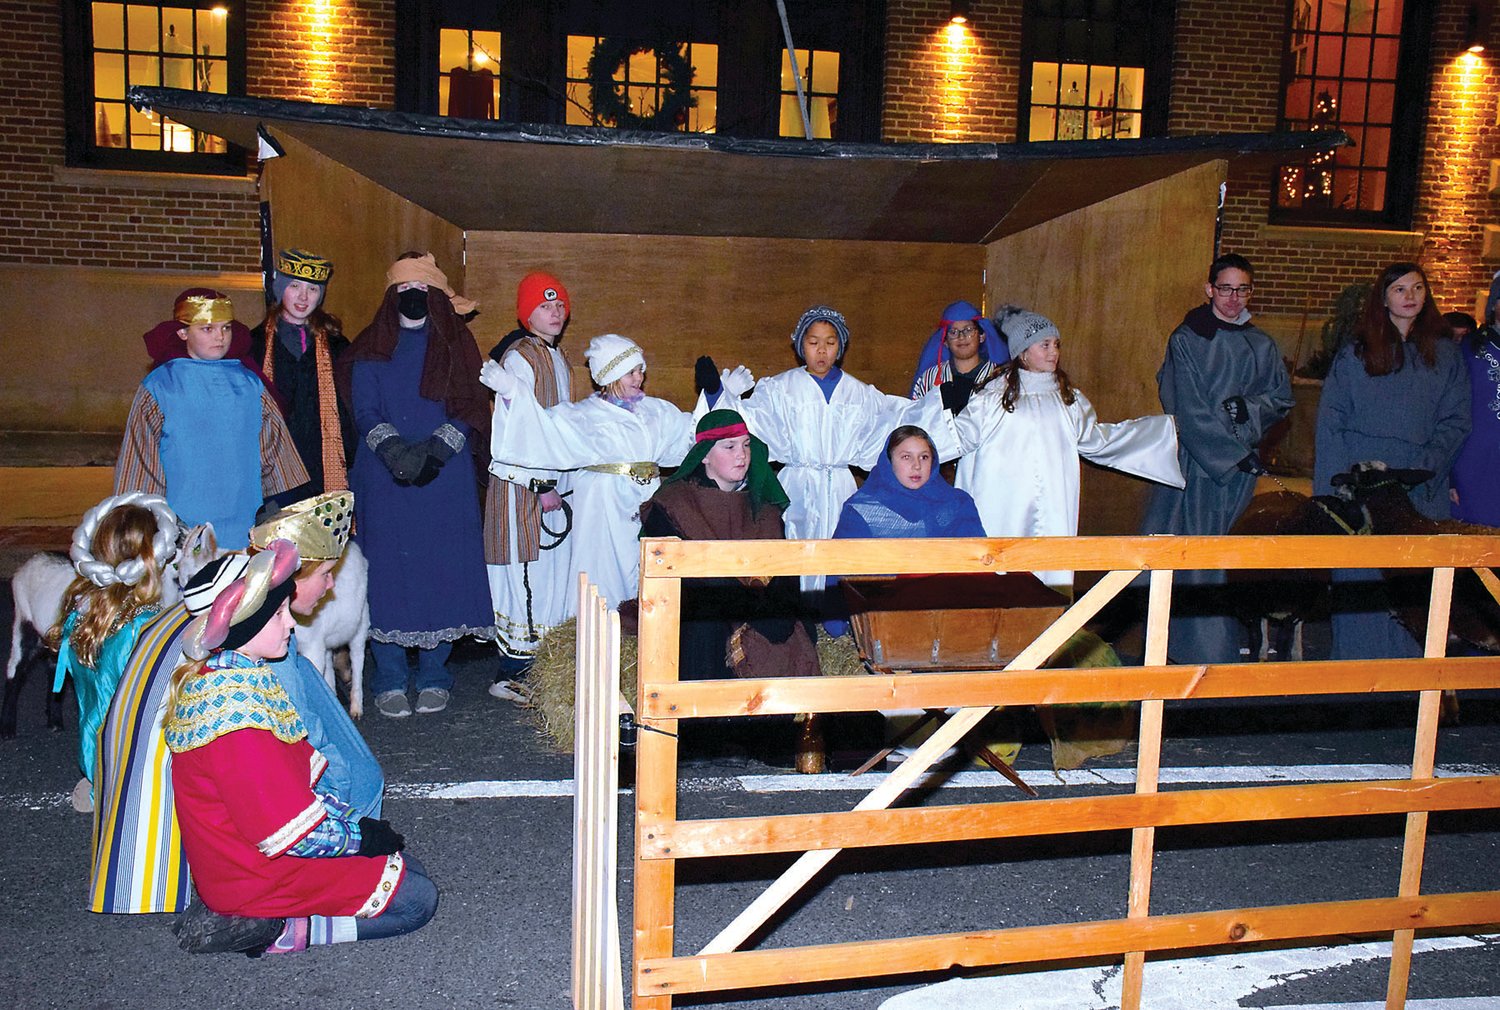 A live Nativity by East Swamp Church.